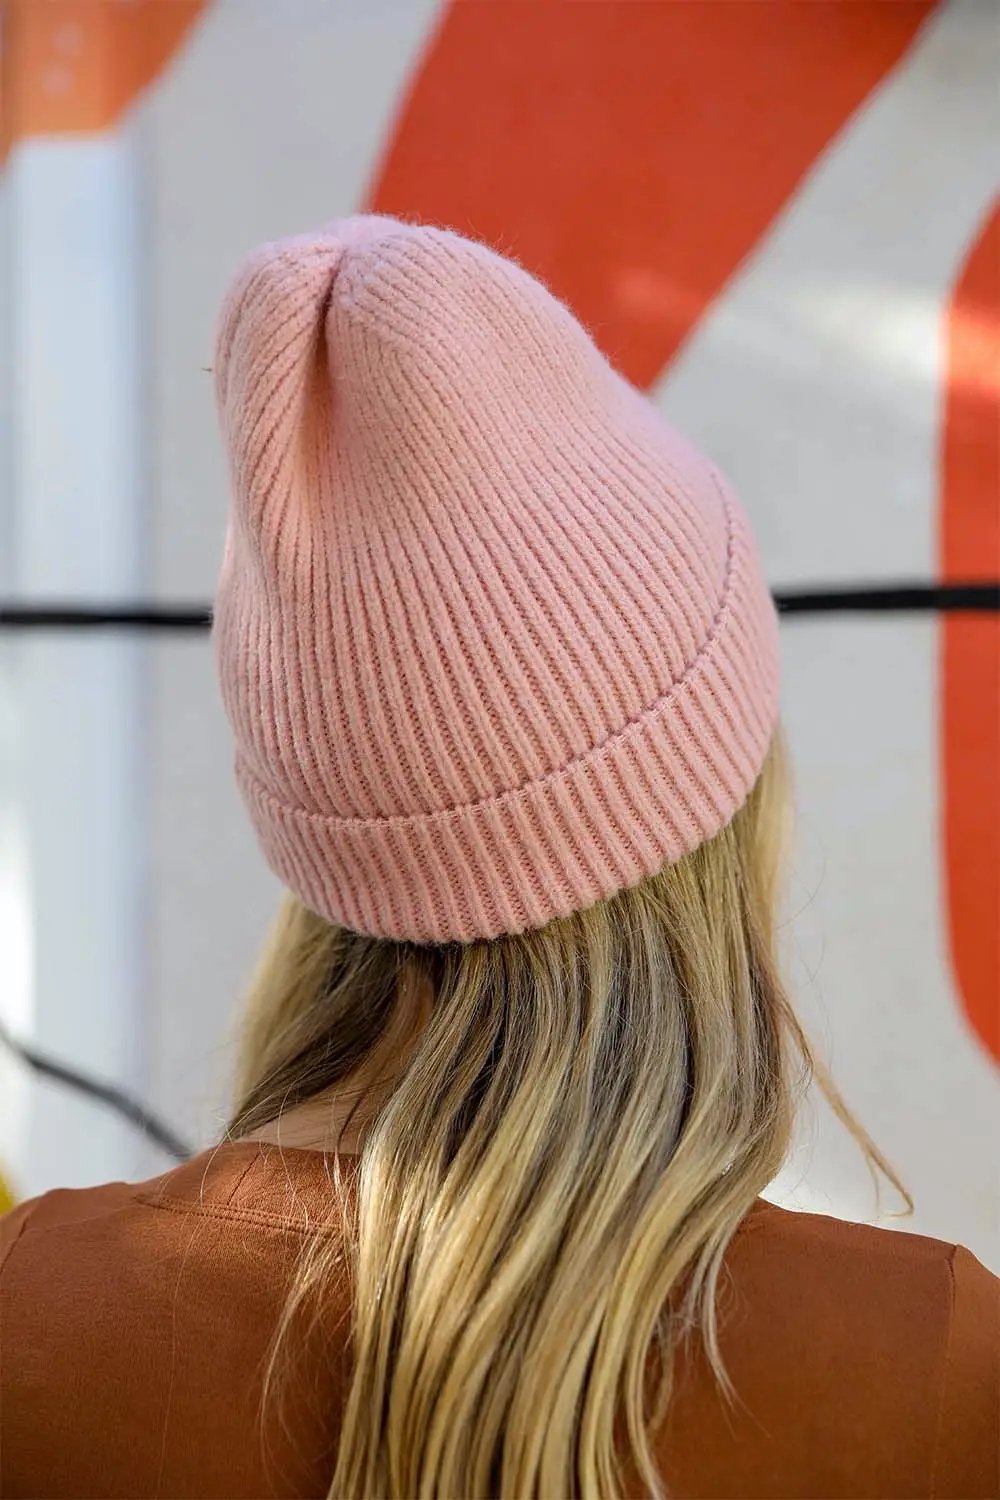 Smiley Face Ribbed Beanie - Pink - Hats